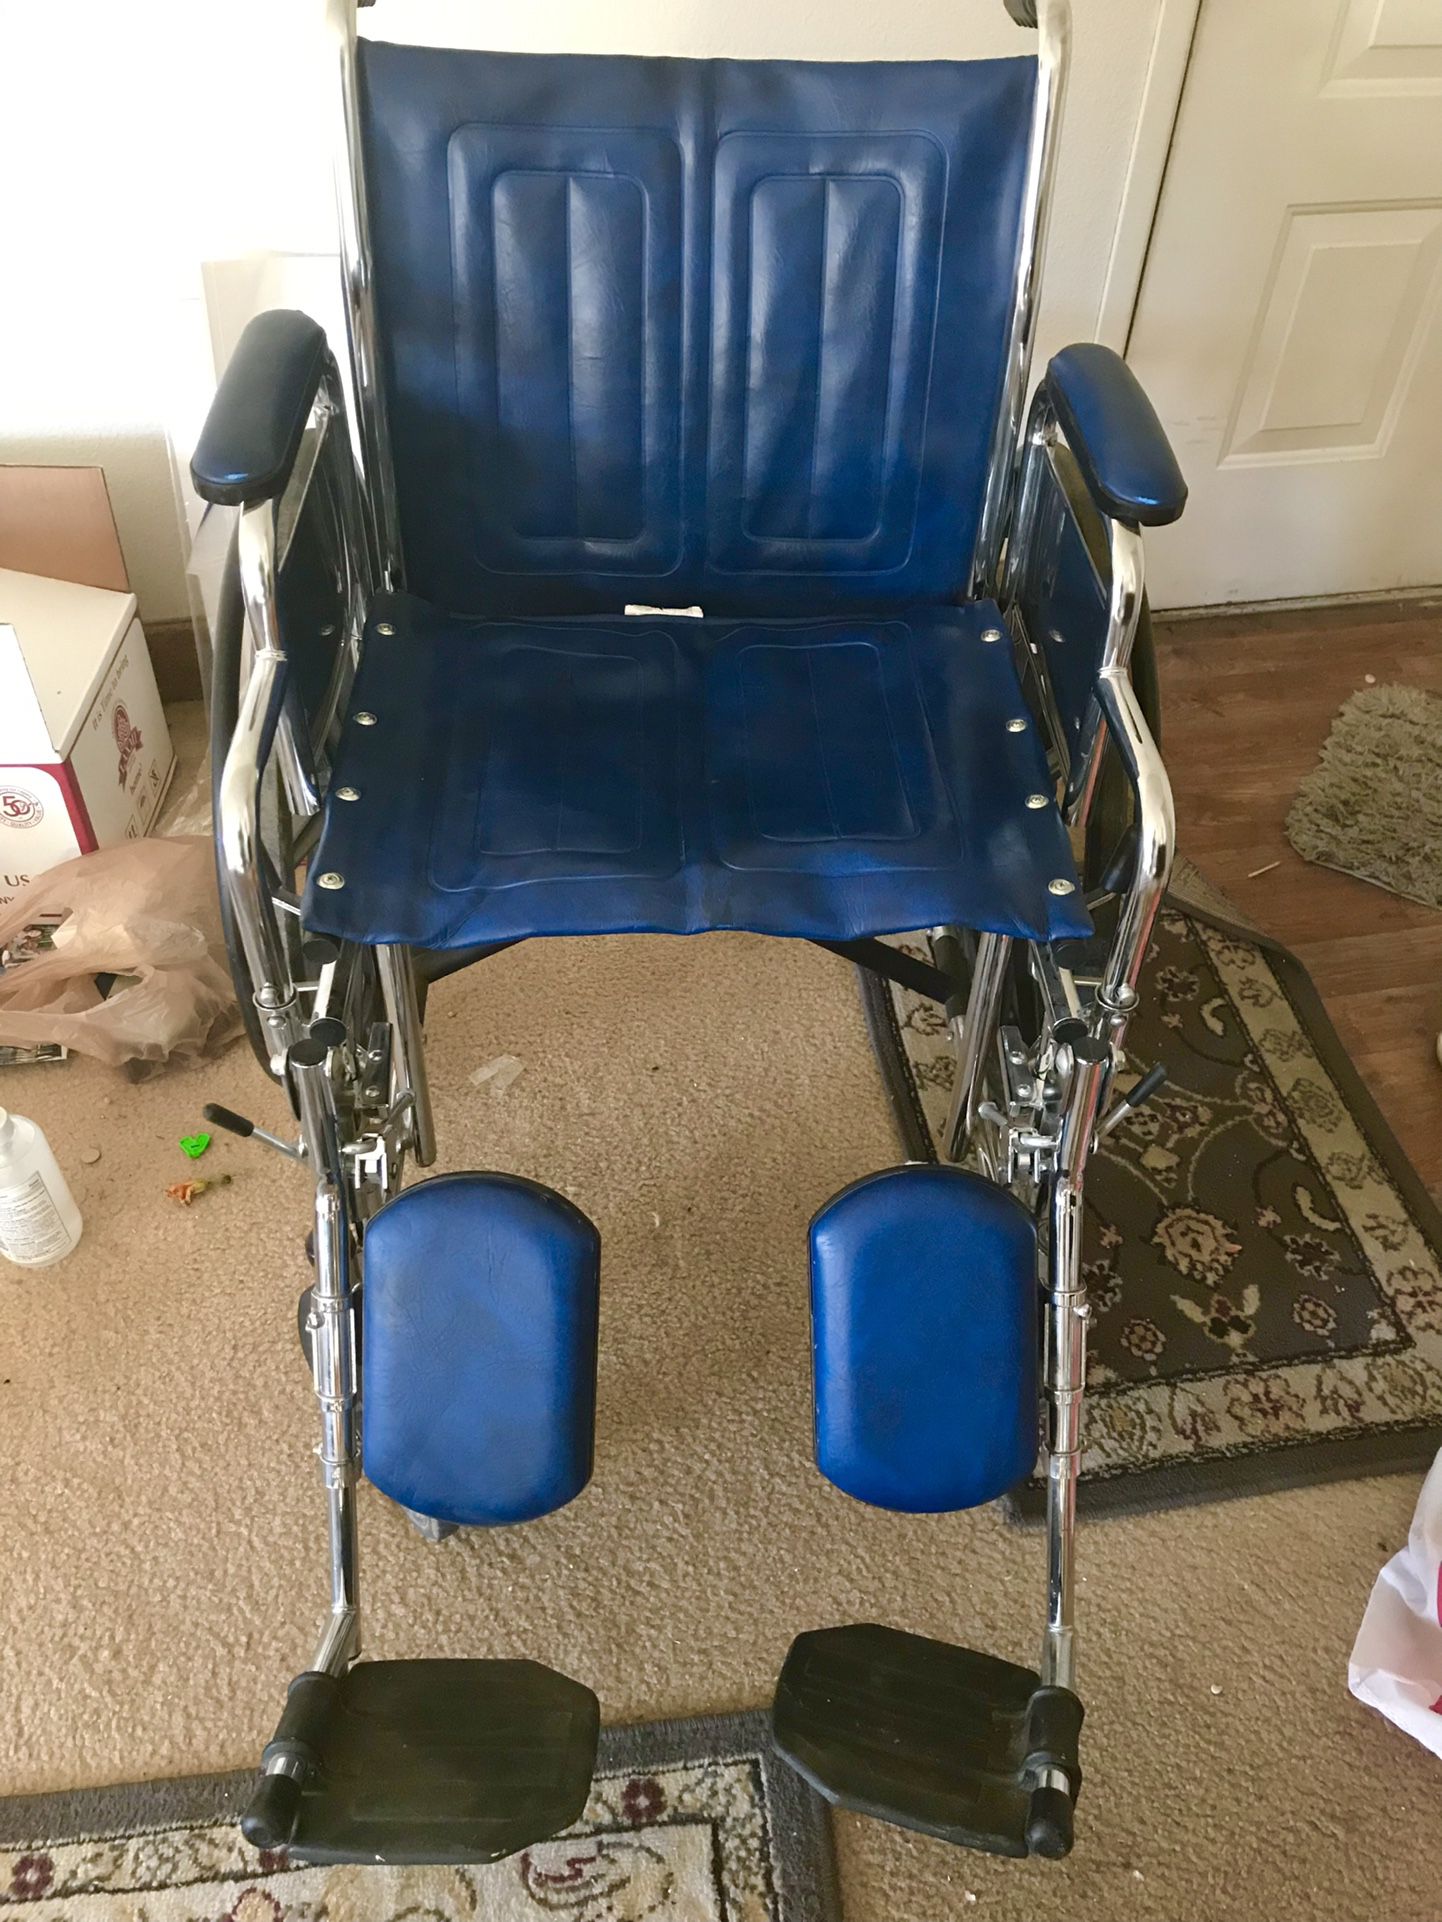 Invacare Tracer EX Wheel Chair With Foot Rest And Thigh Support- Excellent Condition